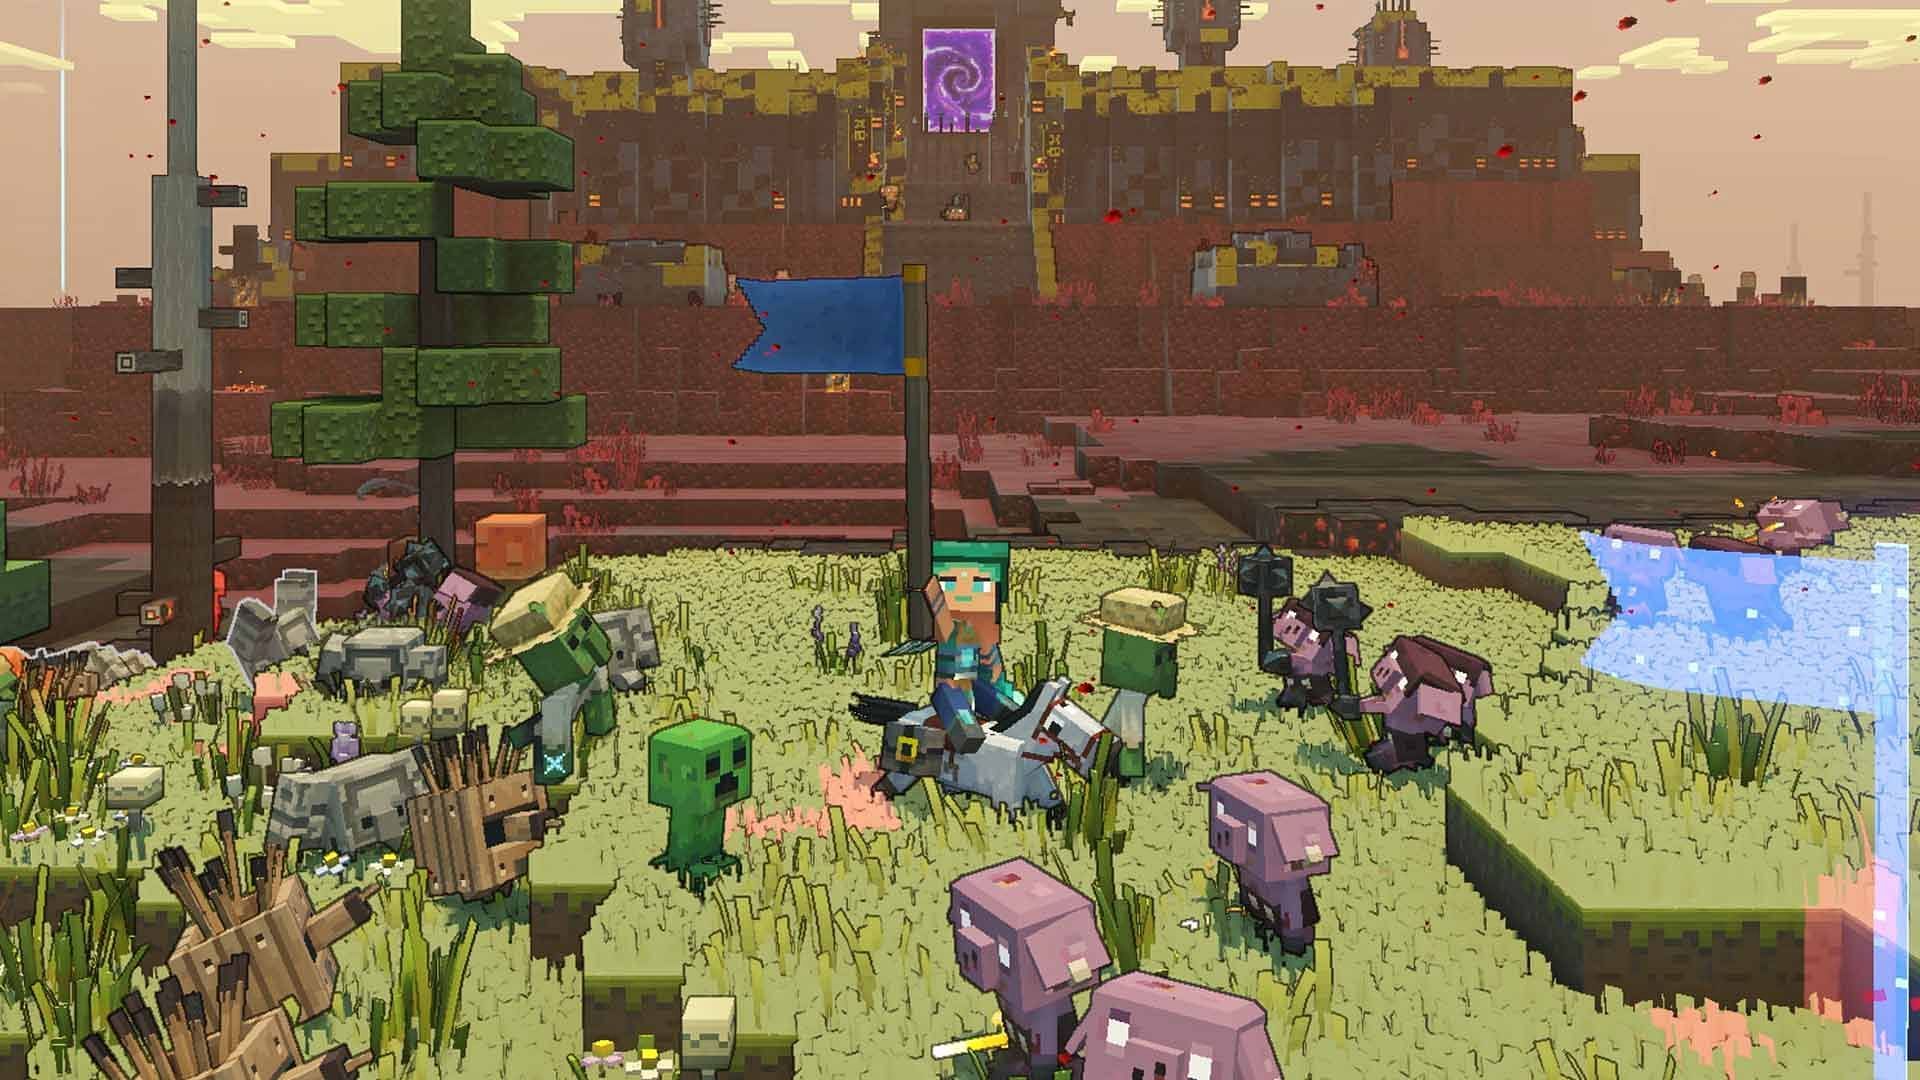 Players can save the Overworld in Minecraft Legends across many devices (Image via Mojang)